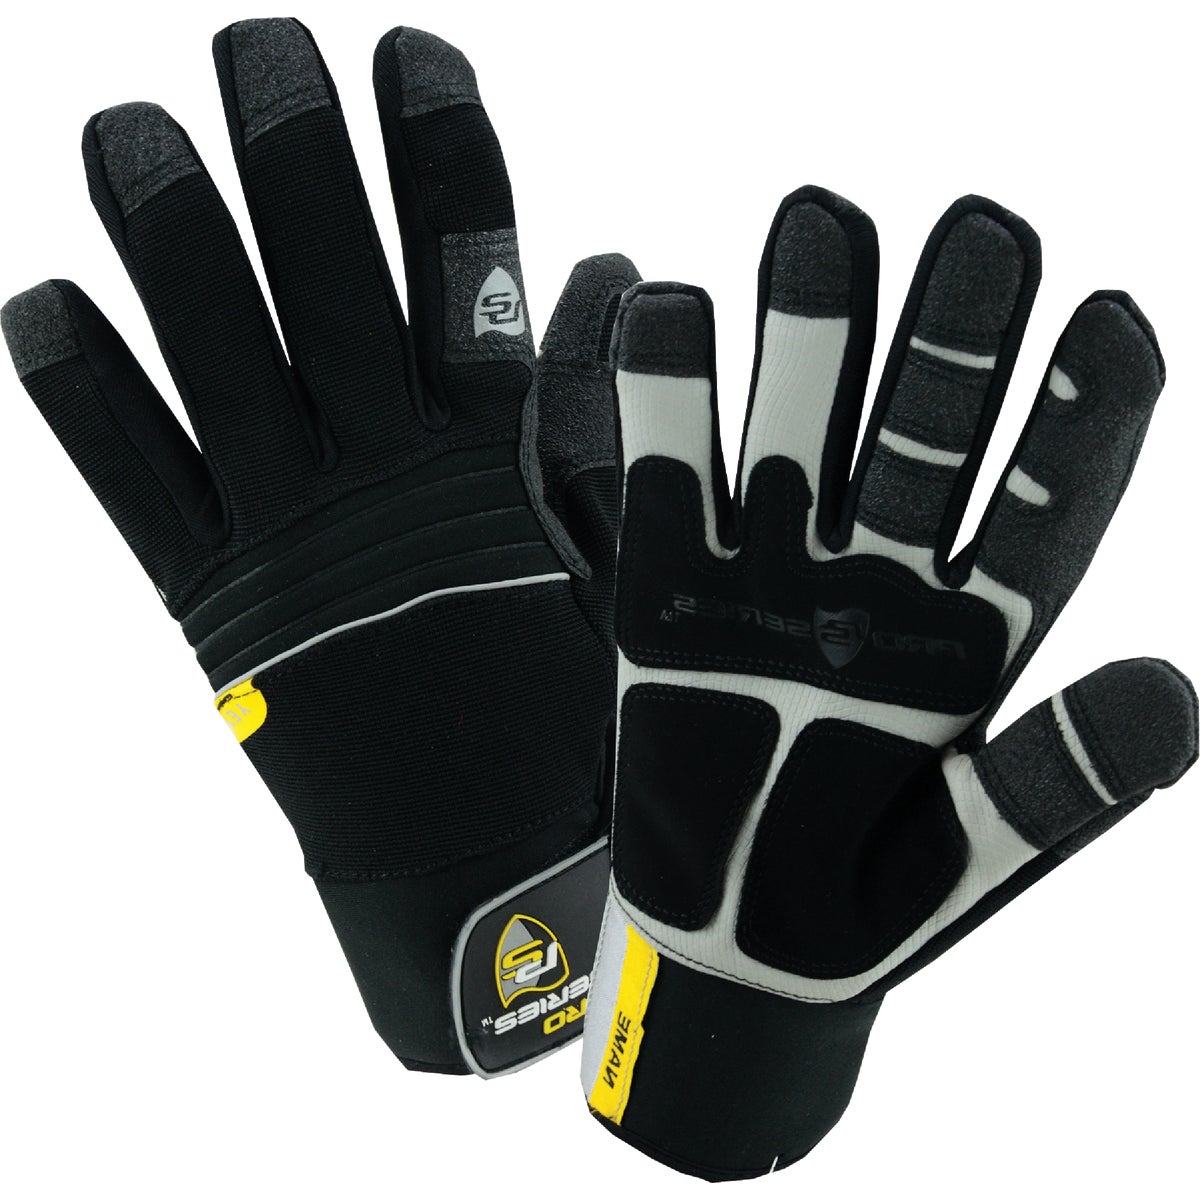 Item 700955, Insulated, lightweight, and breathable glove designed to enhance 